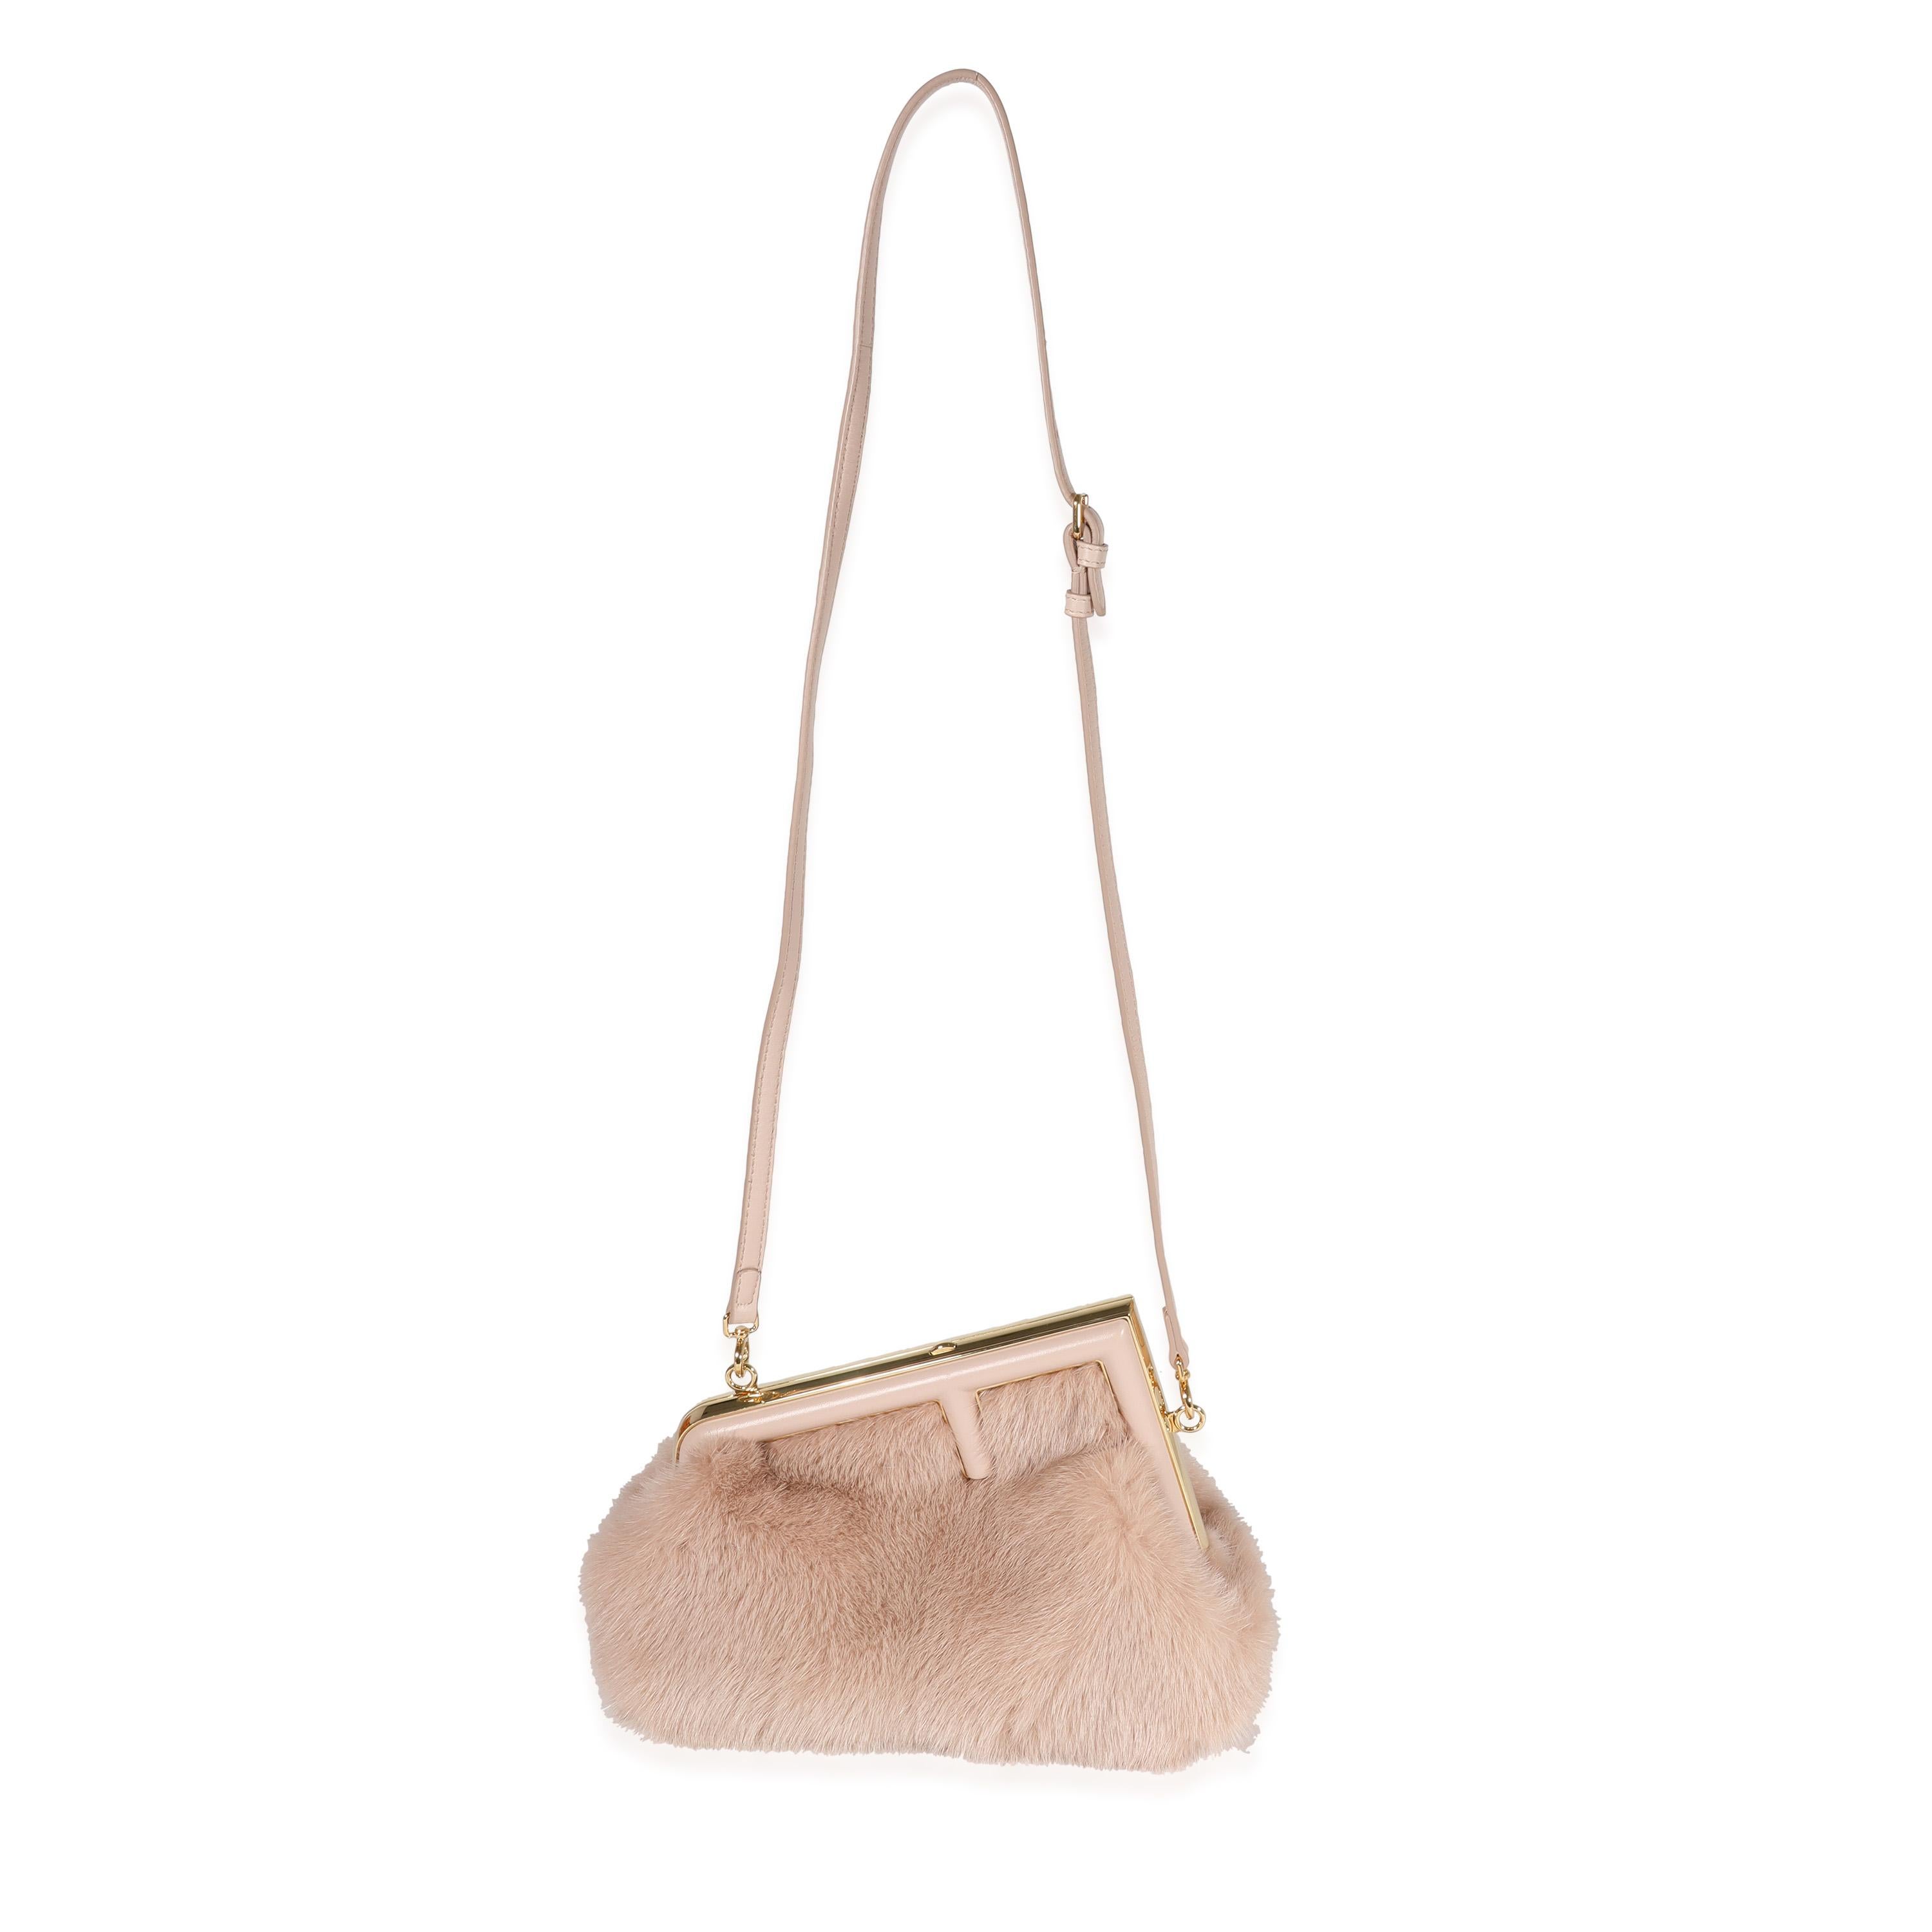 Listing Title: Fendi Blush Mink & Leather Small First Bag
SKU: 122058
MSRP: 5500.00
Condition: Pre-owned 
Handbag Condition: Excellent
Condition Comments: Excellent Condition. Scuff on leather trim. No other visible signs of wear.
Brand: